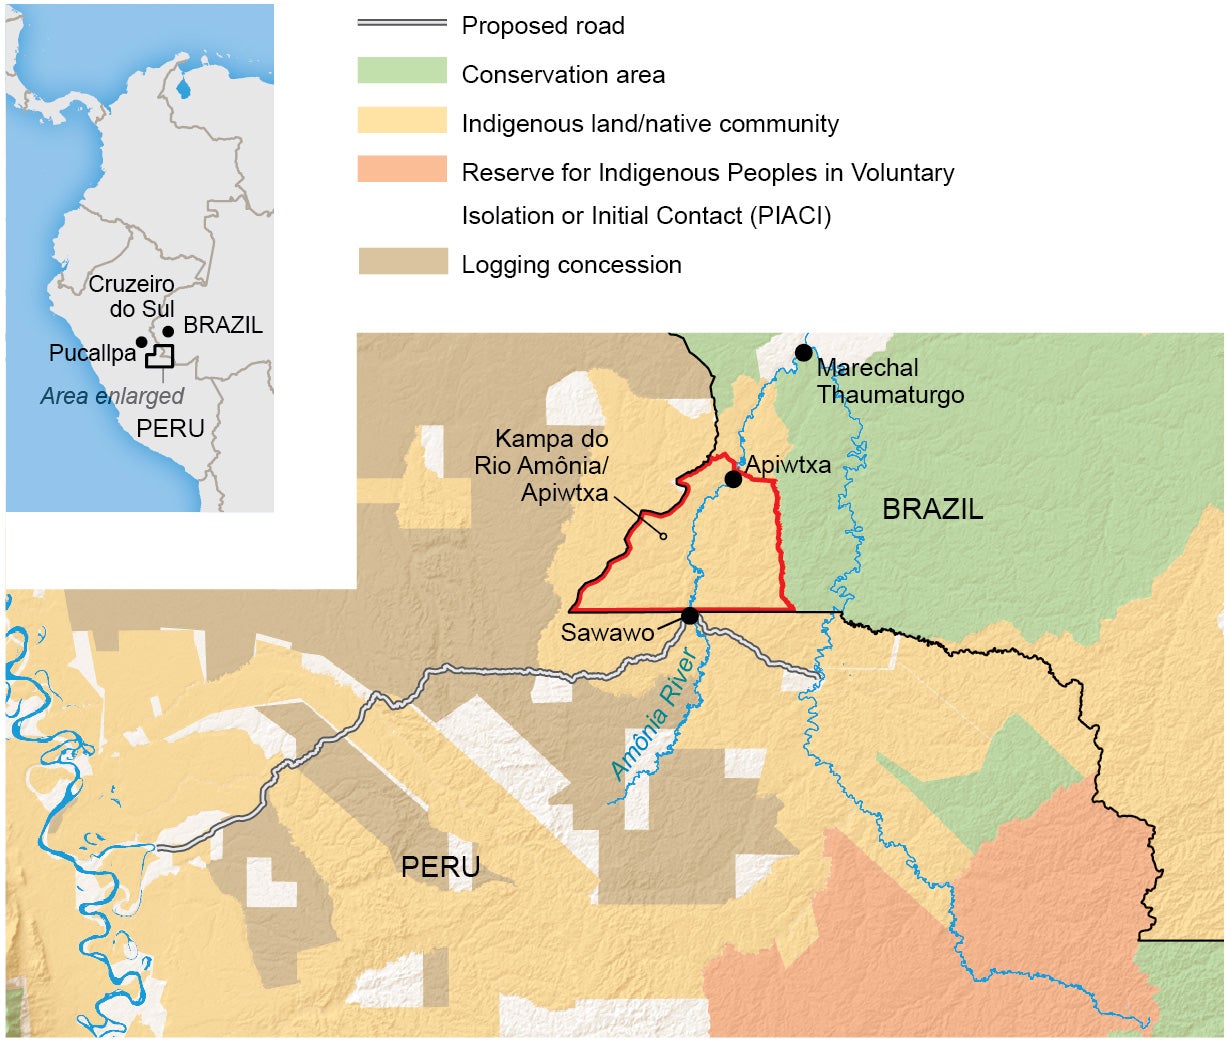 Map highlights borderland between Brazil and Peru where the Ashaninka live and route of the proposed logging road.